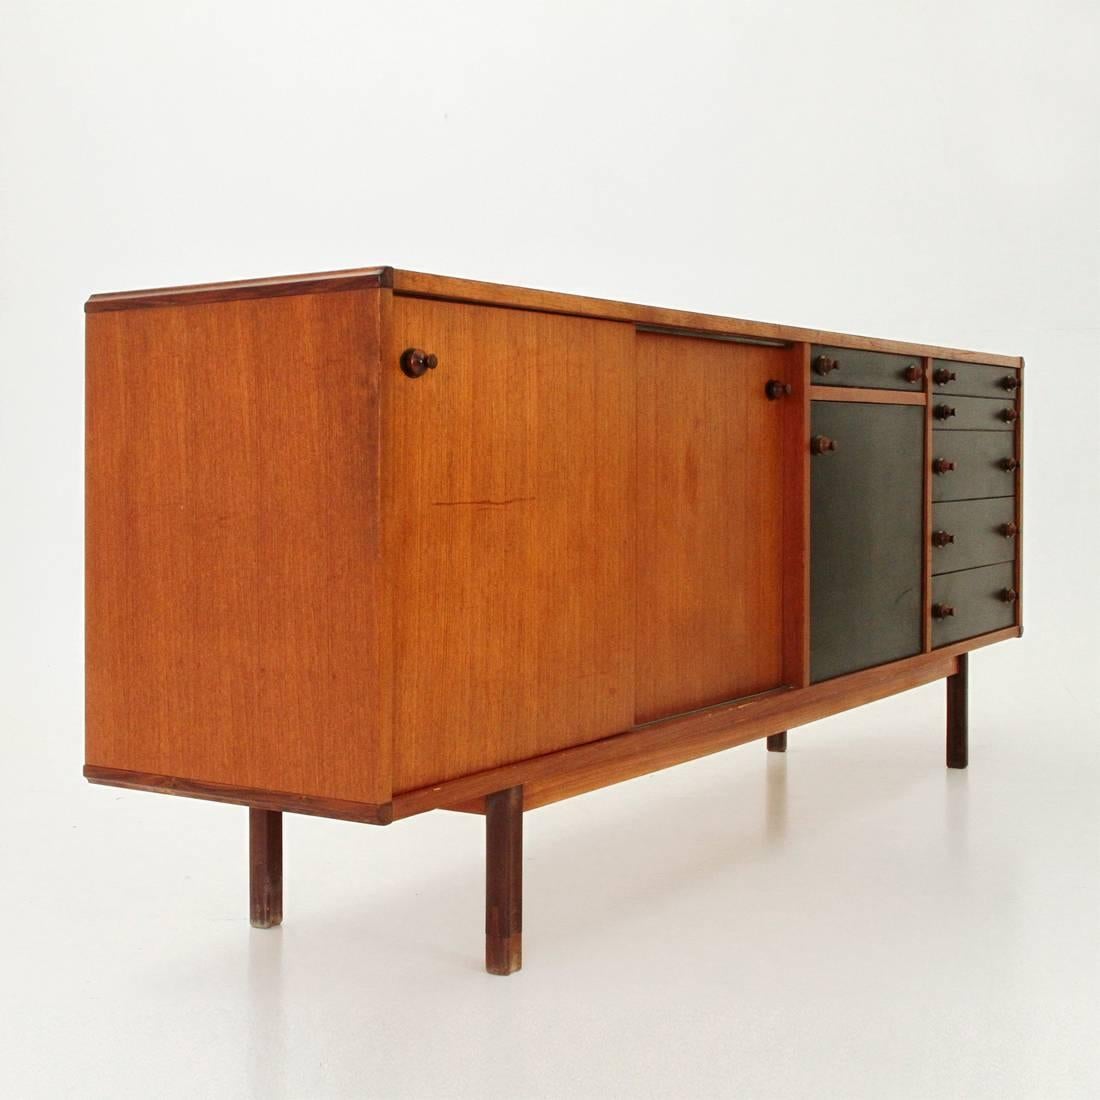 Beautiful Italian sideboard of the 1960s.
Wood veneered structure with solid wood corner.
Door and drawer right side painted black.
Wooden knobs with elliptical brass washer.
wooden legs with different wood terminals.
Good condition of the